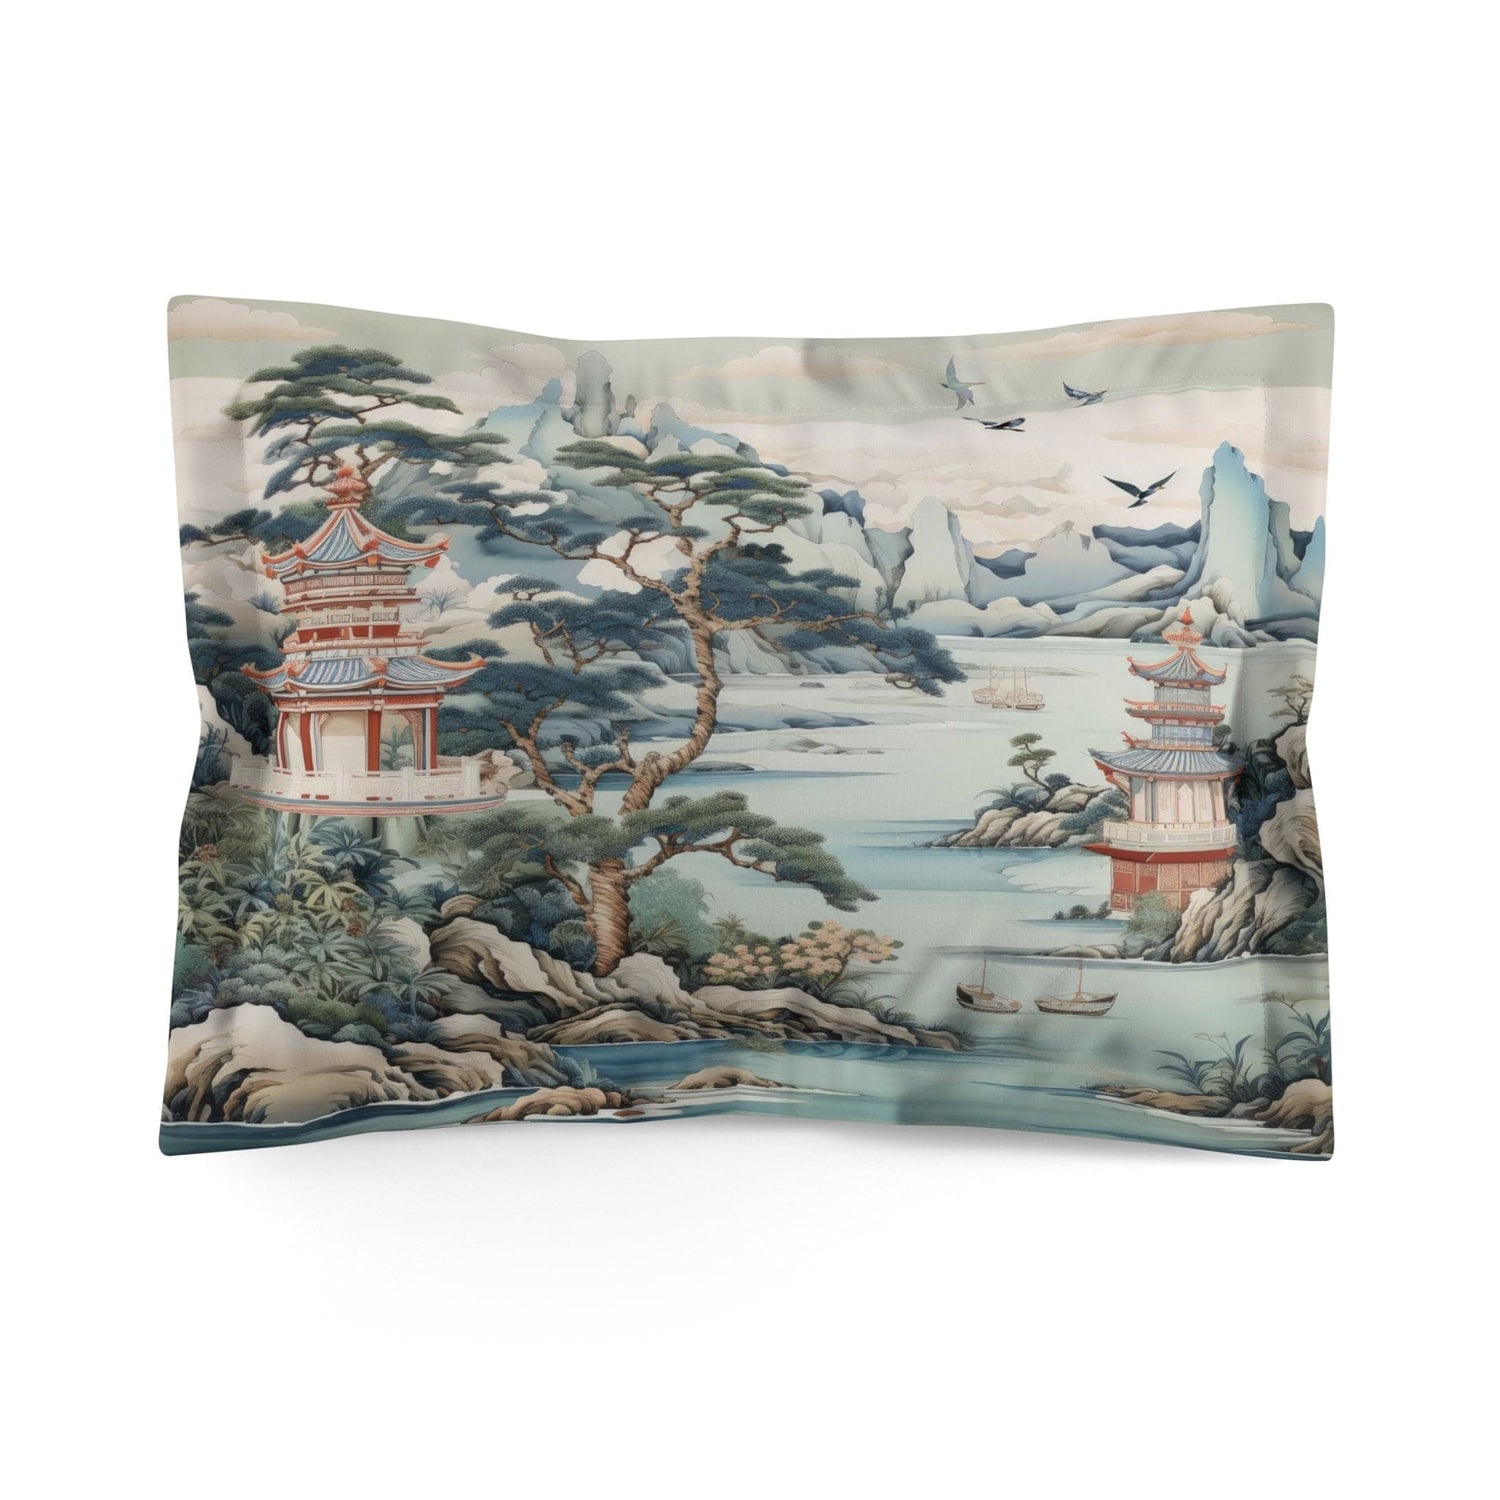 Kate McEnroe New York Chinoiserie Pagoda Landscape Floral Pillow Sham, Country Farmhouse Grandmillenial Bedroom Pillows, Rustic Chic Bedroom Decor - 121281023Pillow Shams17795159820759568696